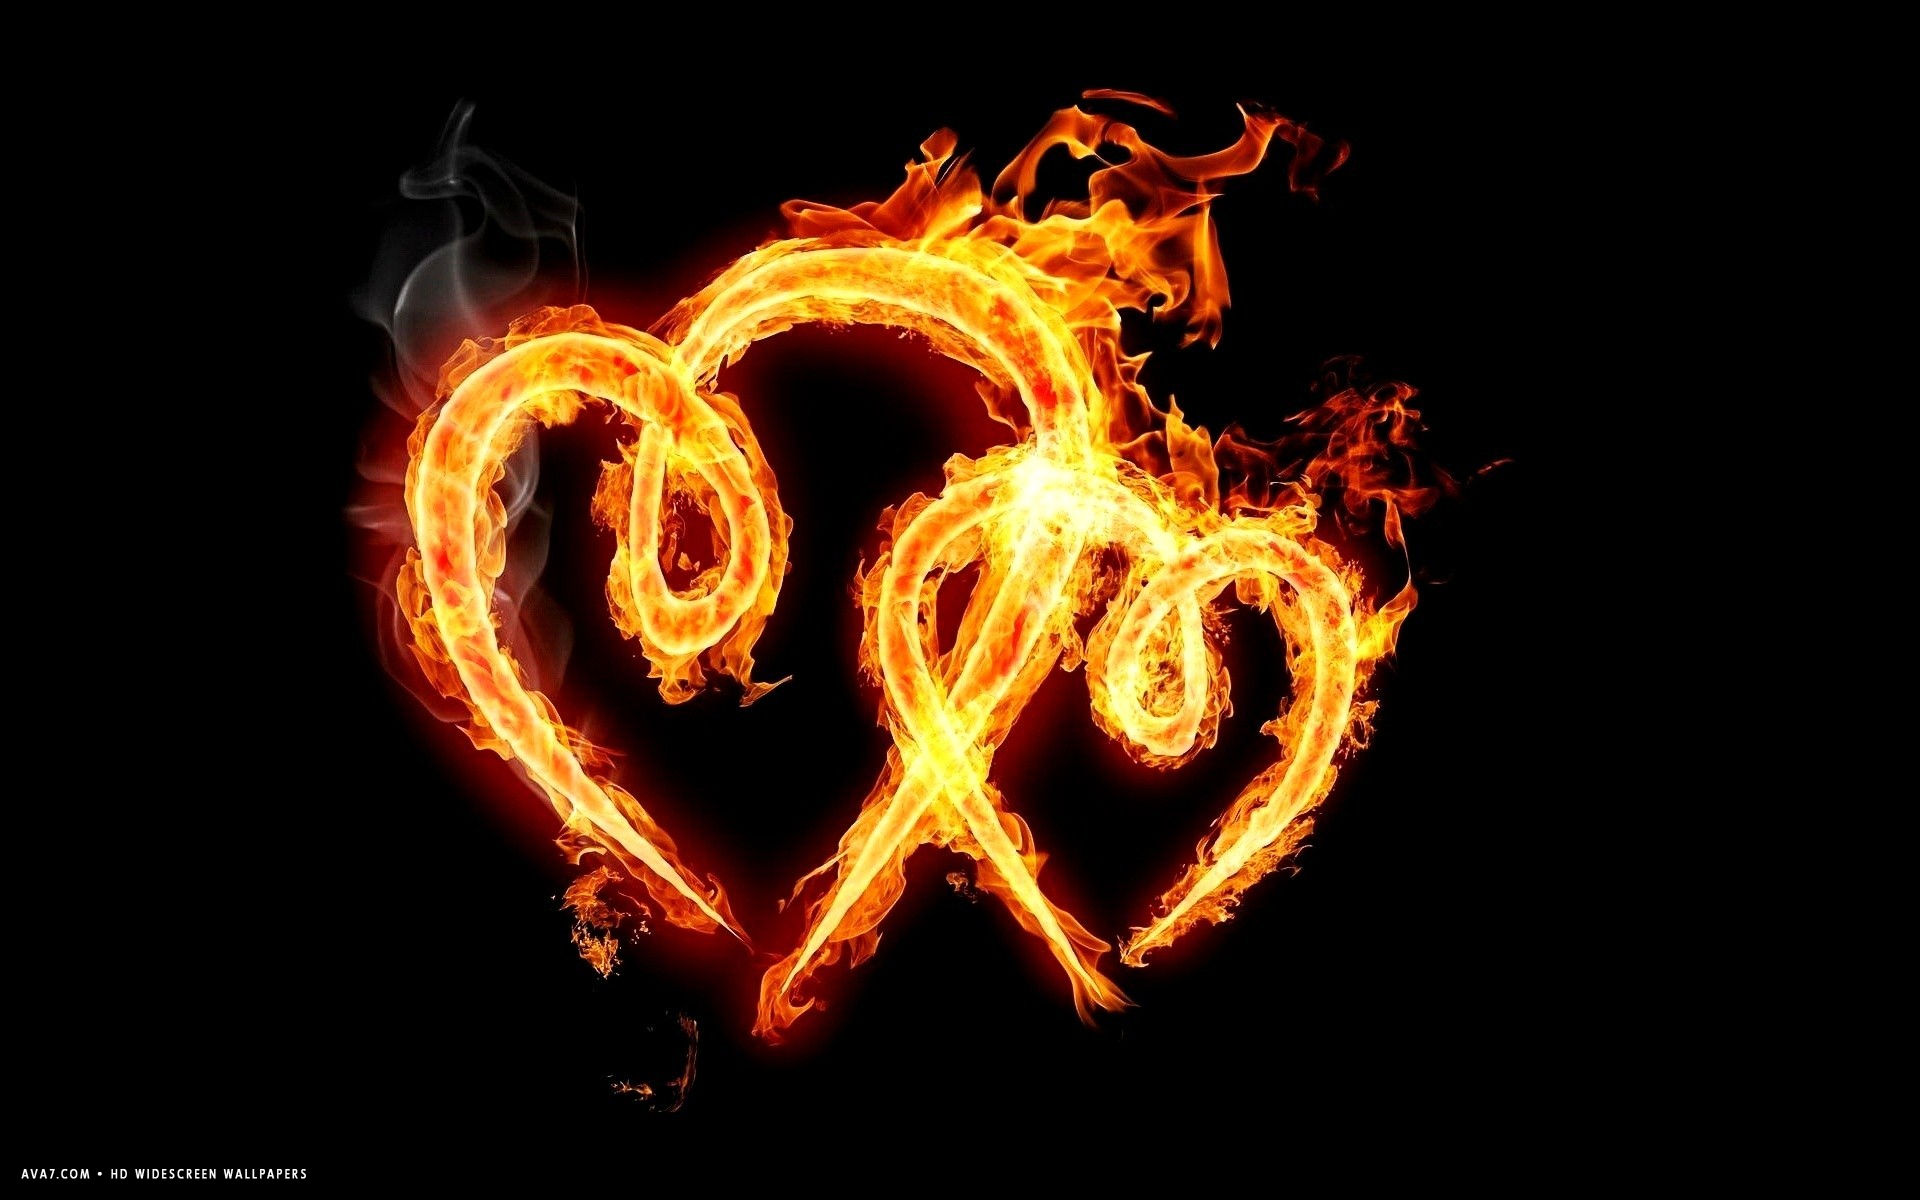 hearts two fire flames burning together hd widescreen wallpaper